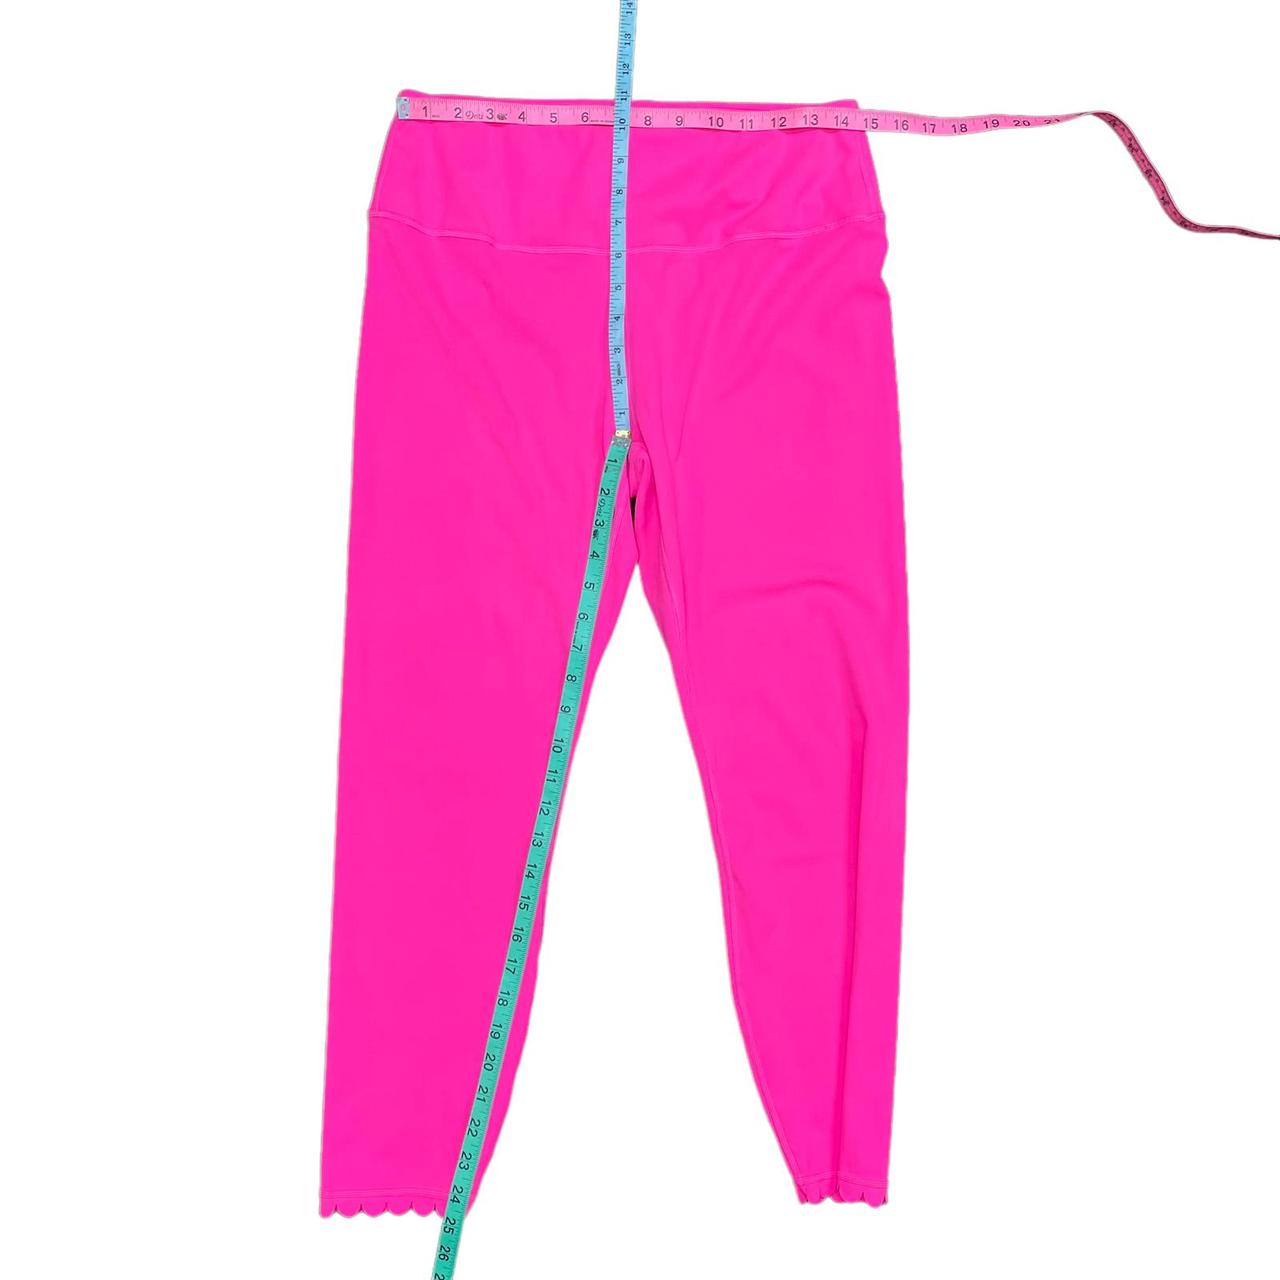 NWT IVL Collective Neon Pink Leggings with Scalloped Edge